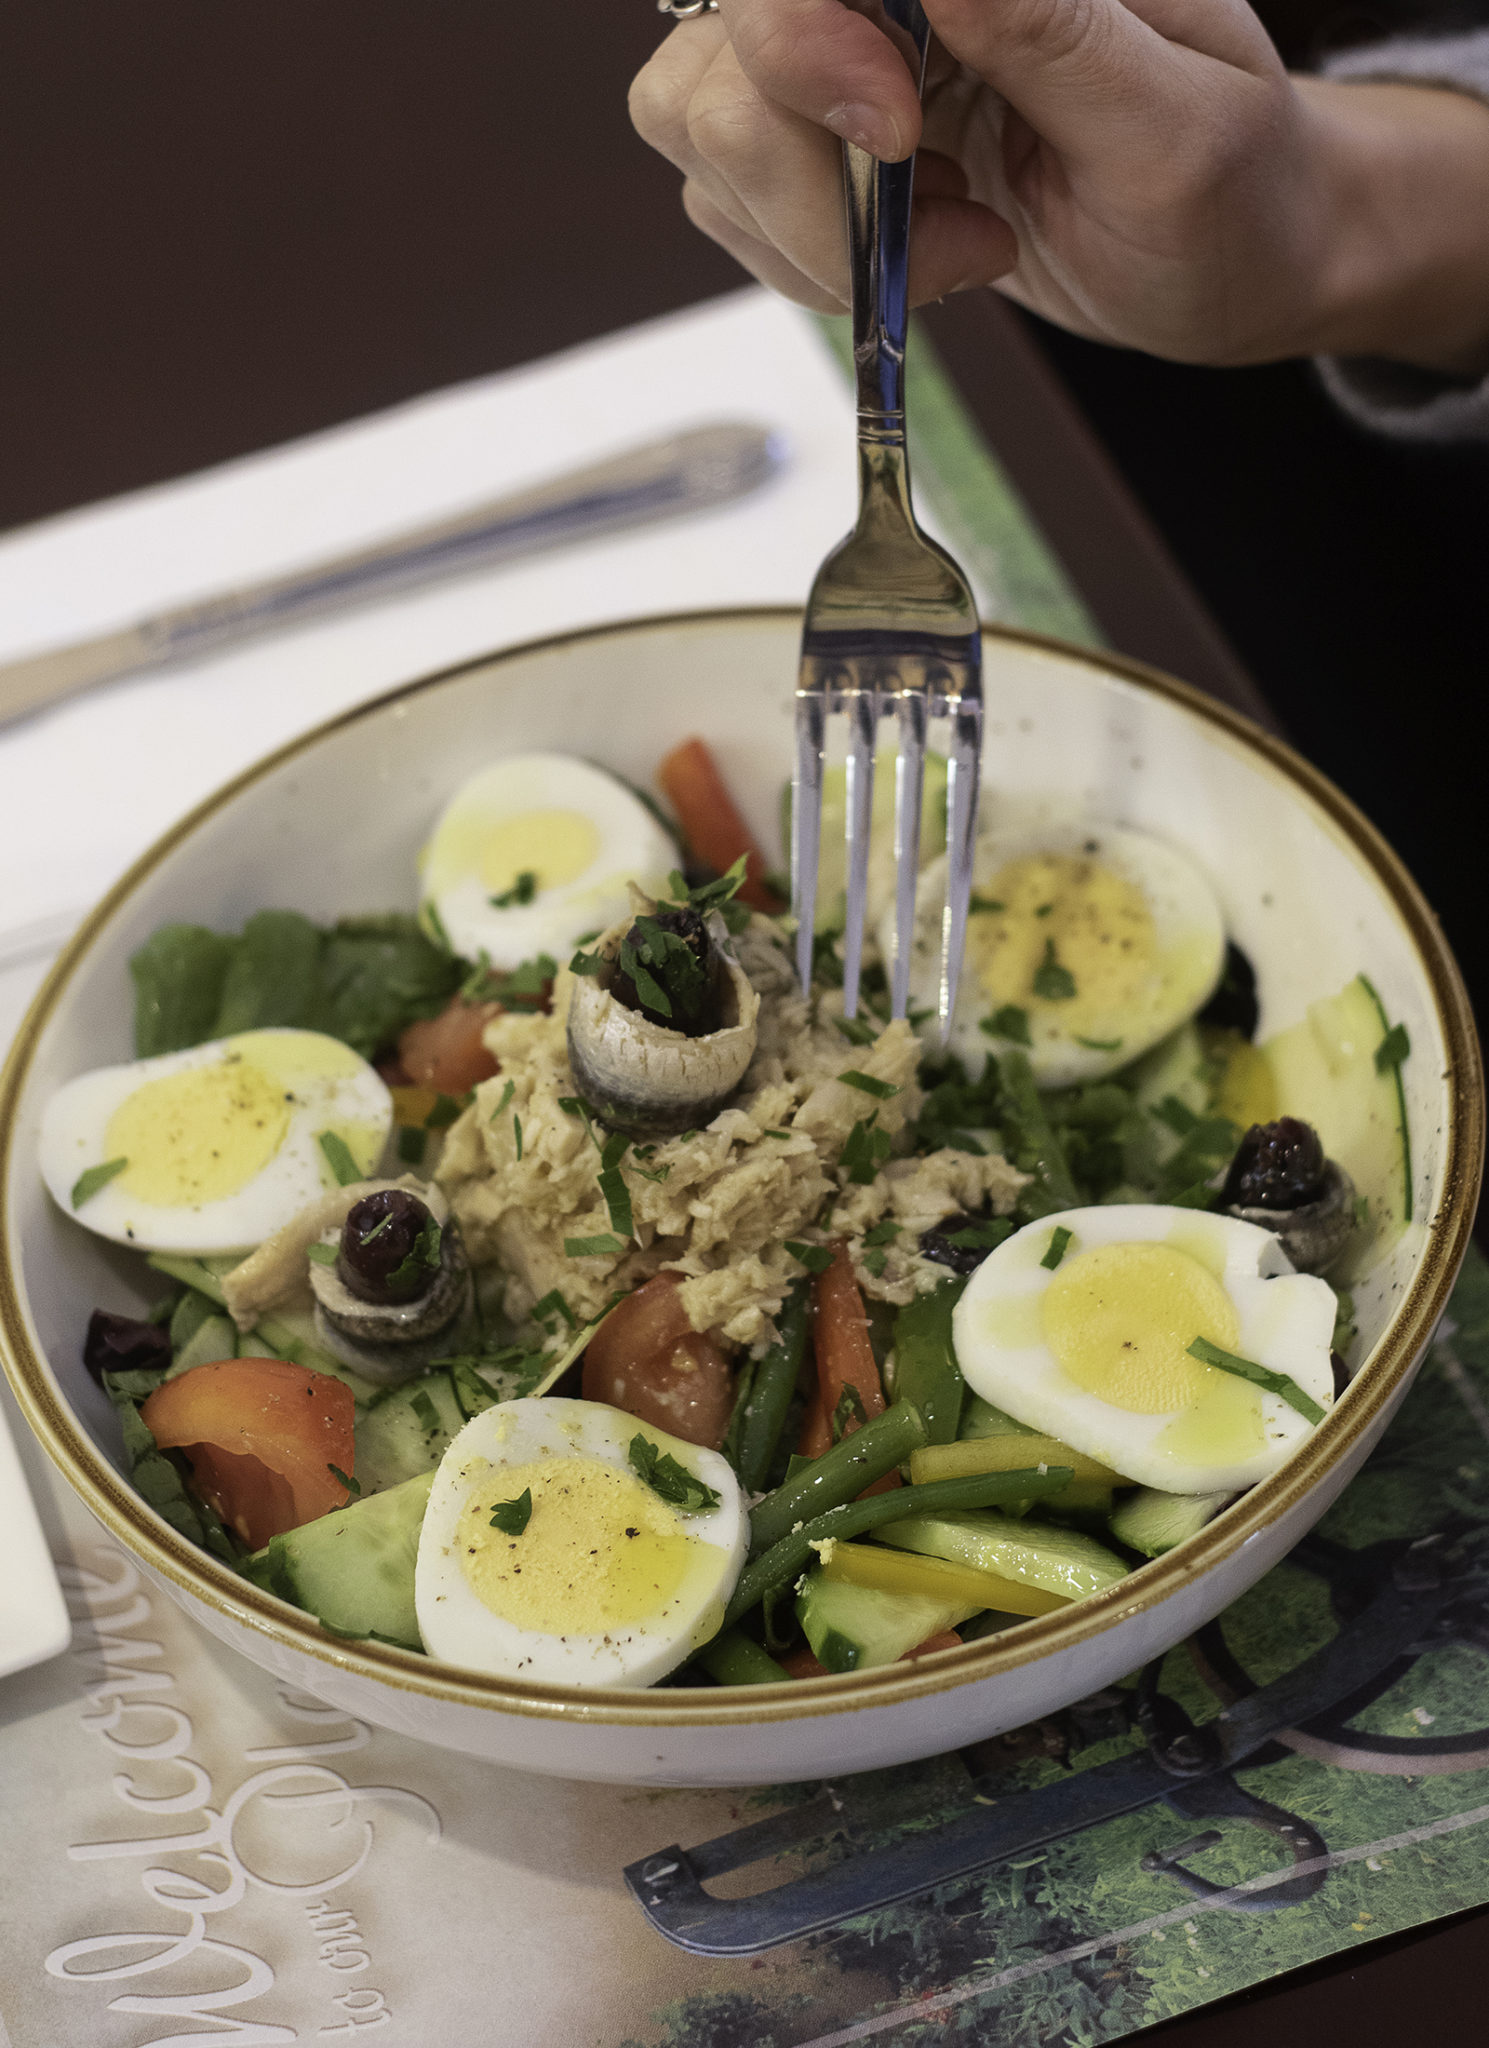 Nicoise salad at Creperie Chez Solange in Larkfield. Heather Irwin/PD